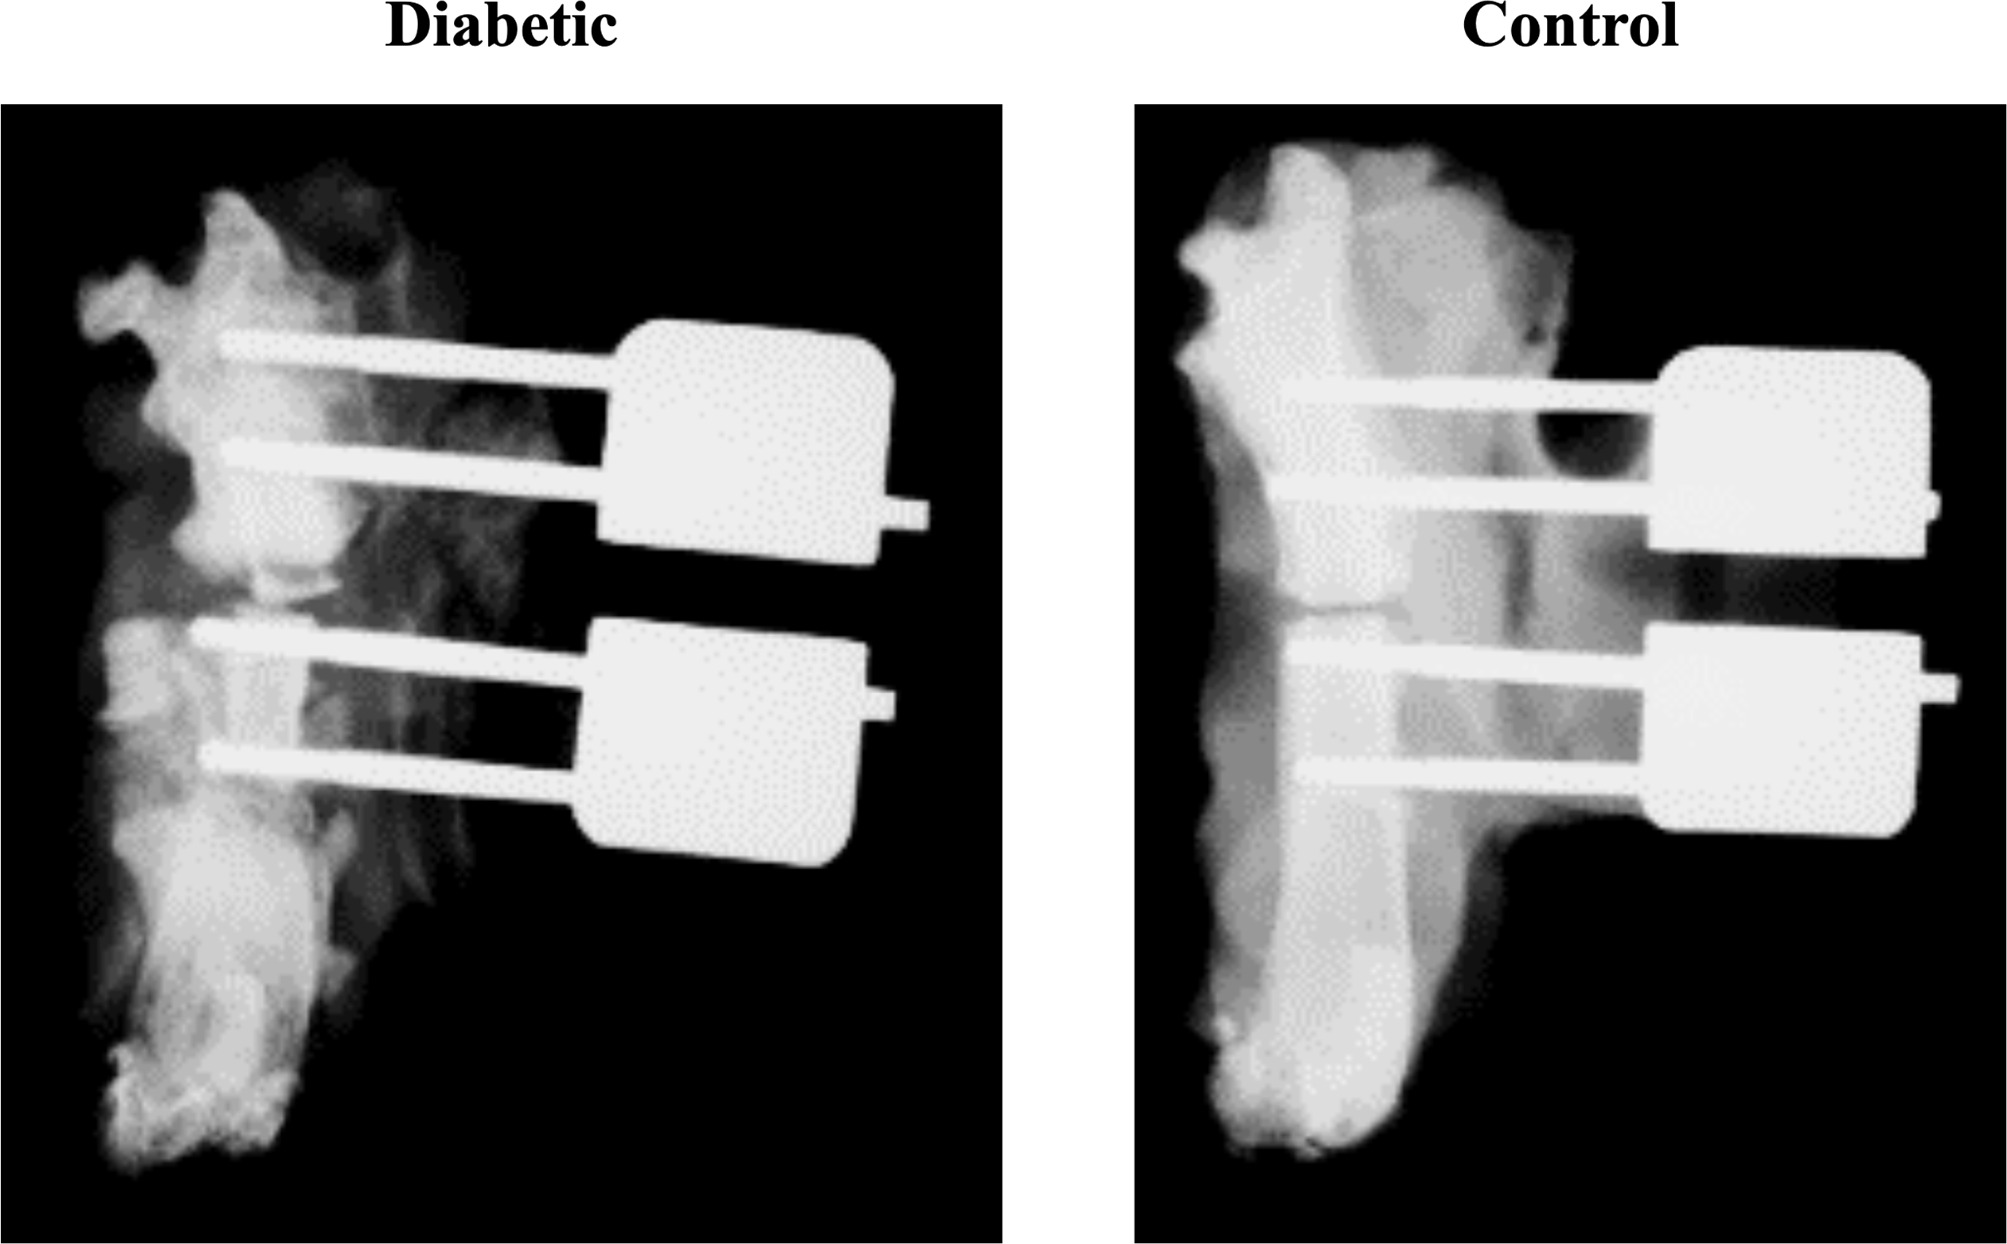 Fig. 1 
            A representative radiograph showing fracture healing of the type 2 diabetes mellitus group compared to non-diabetic controls three weeks post-femoral osteotomy, with external fixators in situ.
          